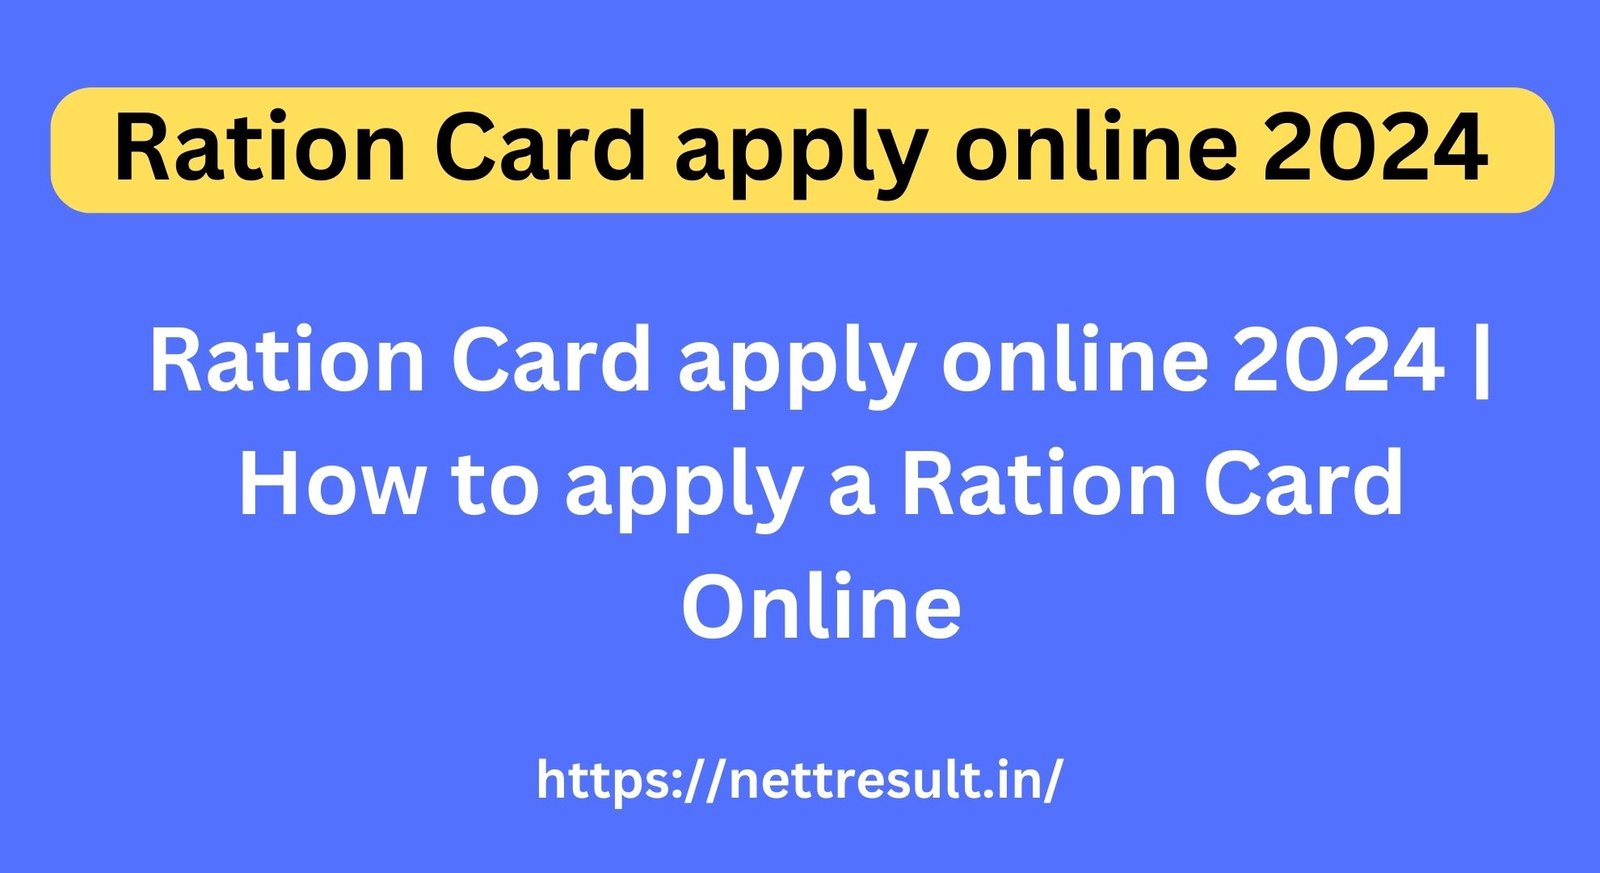 Ration Card apply online 2024